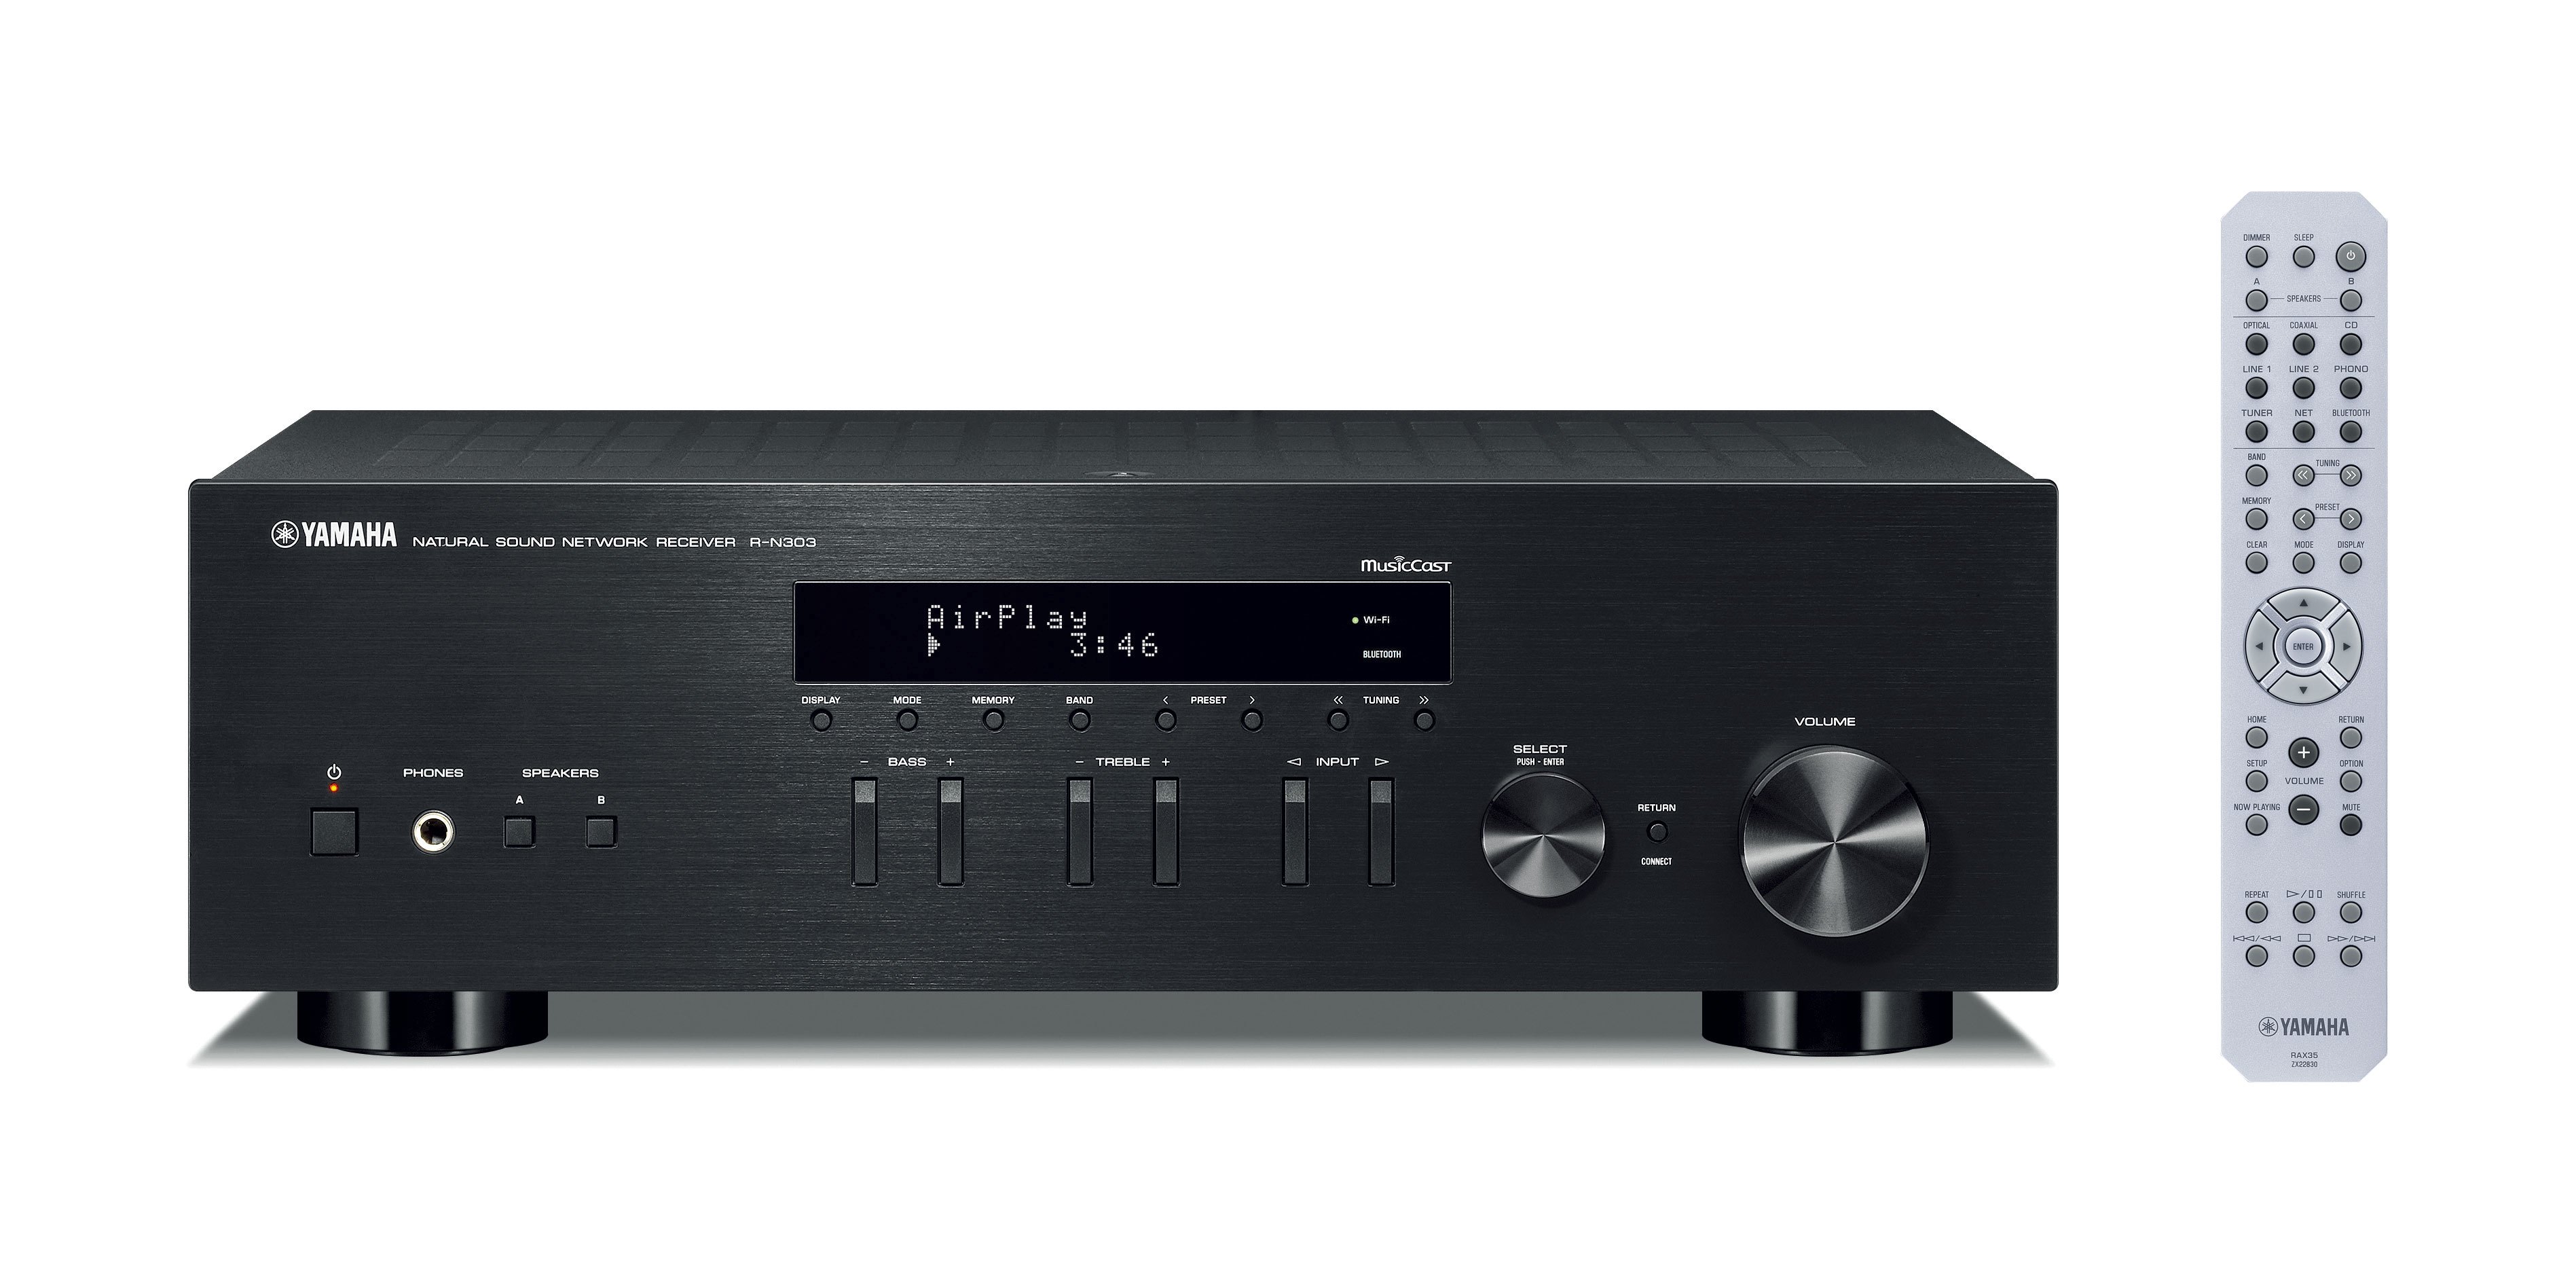 Herstellen repertoire wees stil R-N303 - Overview - Hi-Fi Components - Audio & Visual - Products - Yamaha  USA